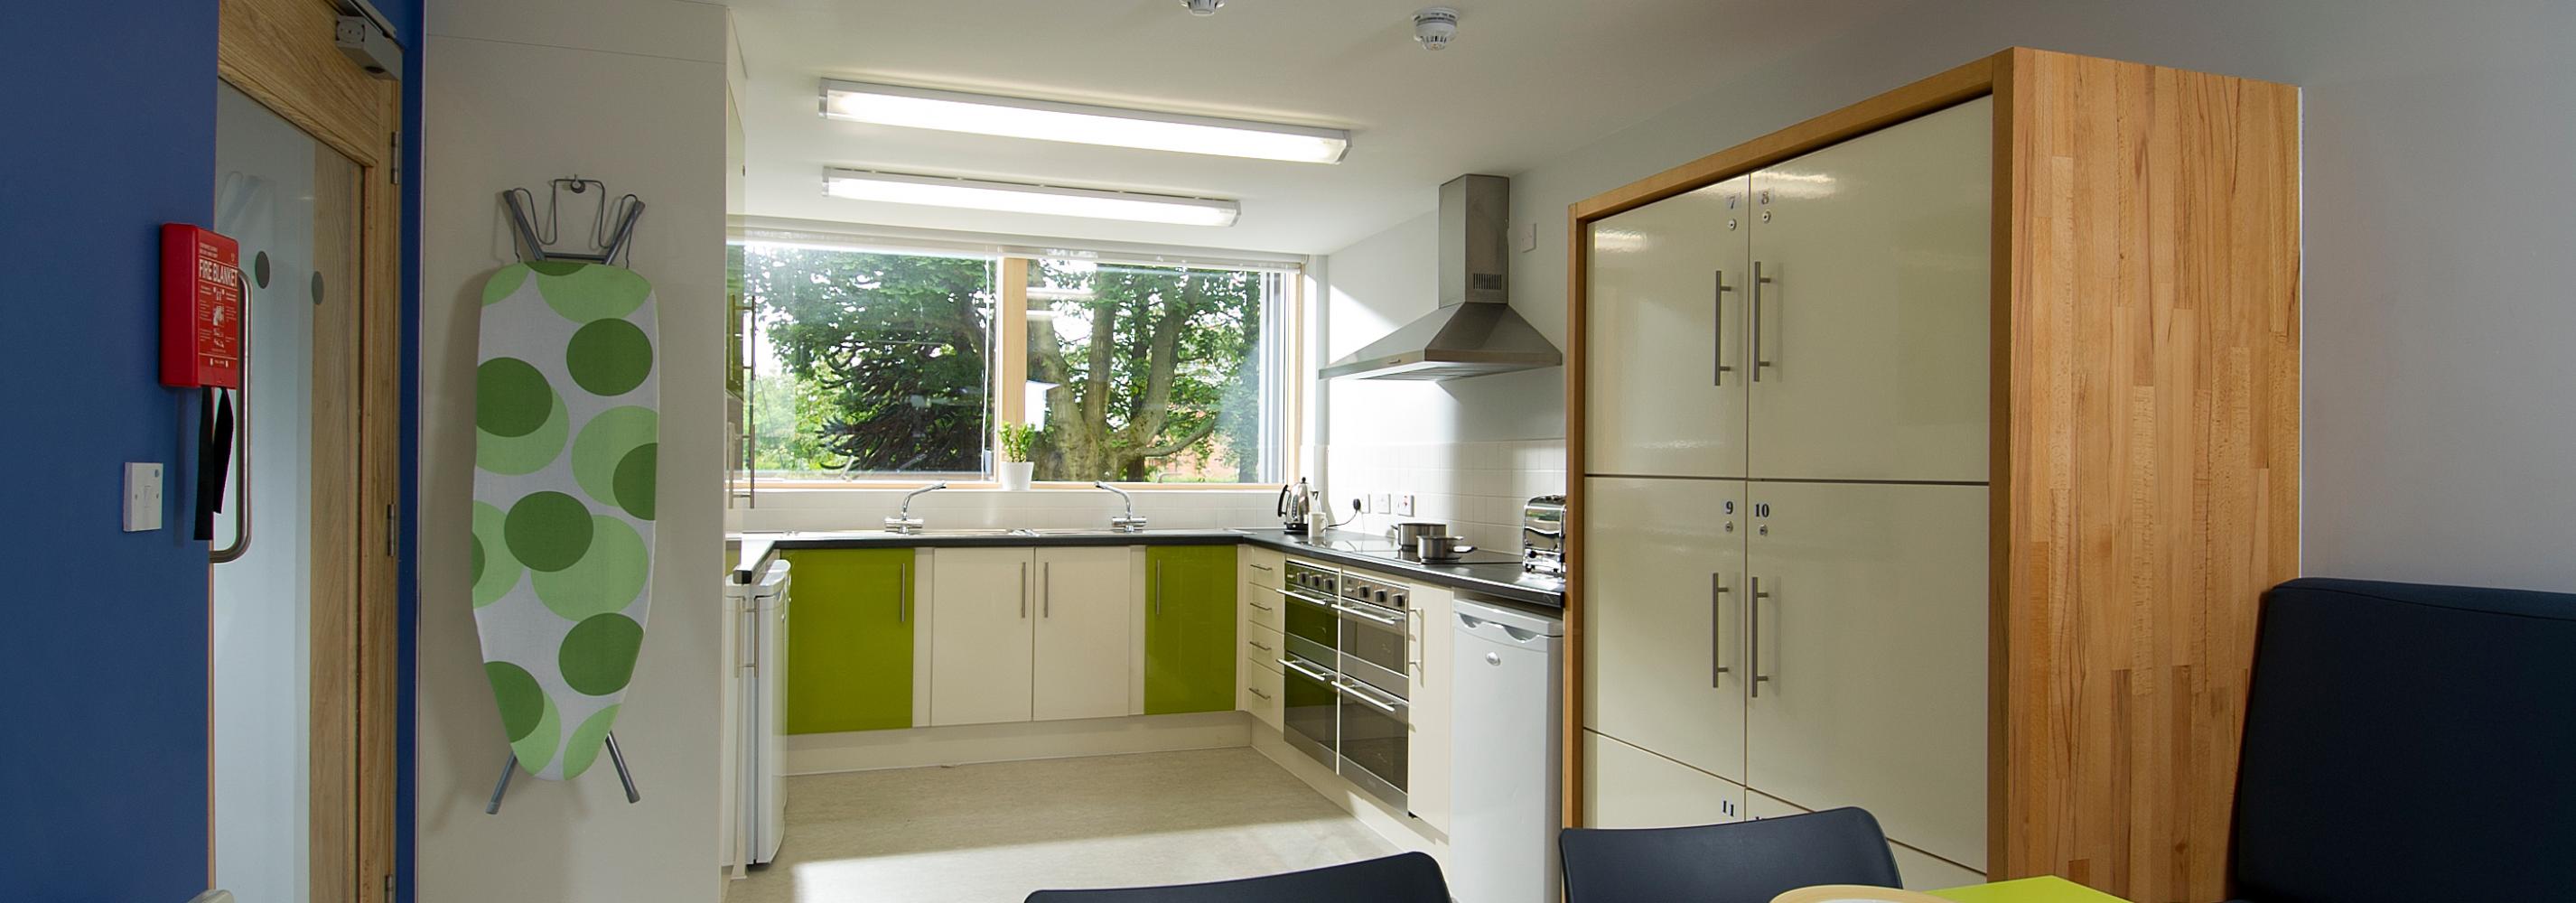 Interior of kitchen and dining area showing facilities and individual food locker storage.